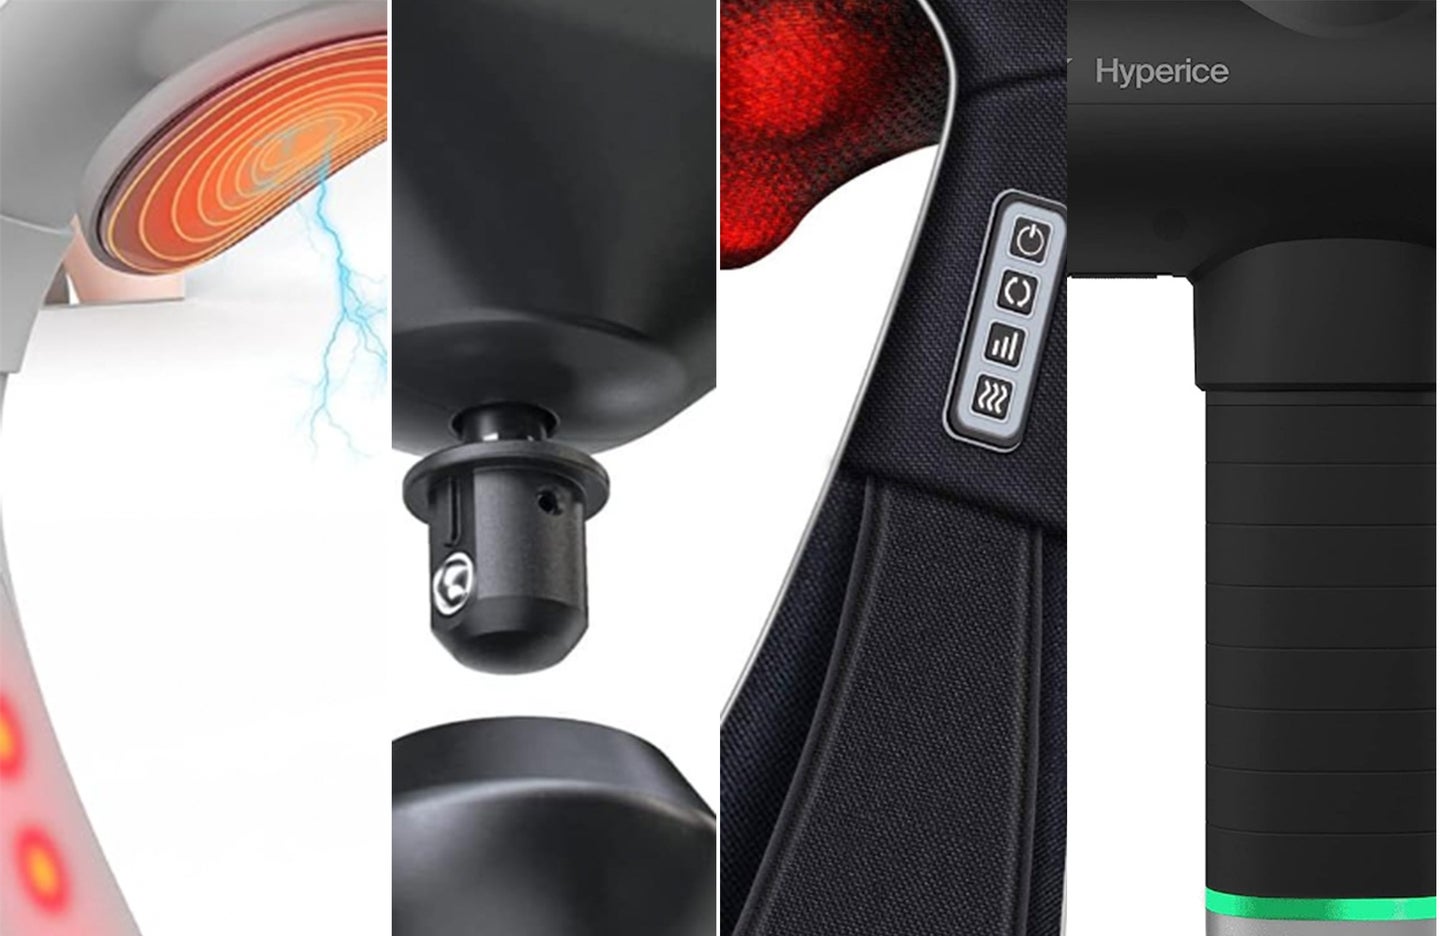 Details of neck massagers from Homedics, Hyperice, Theragun, and Comfier